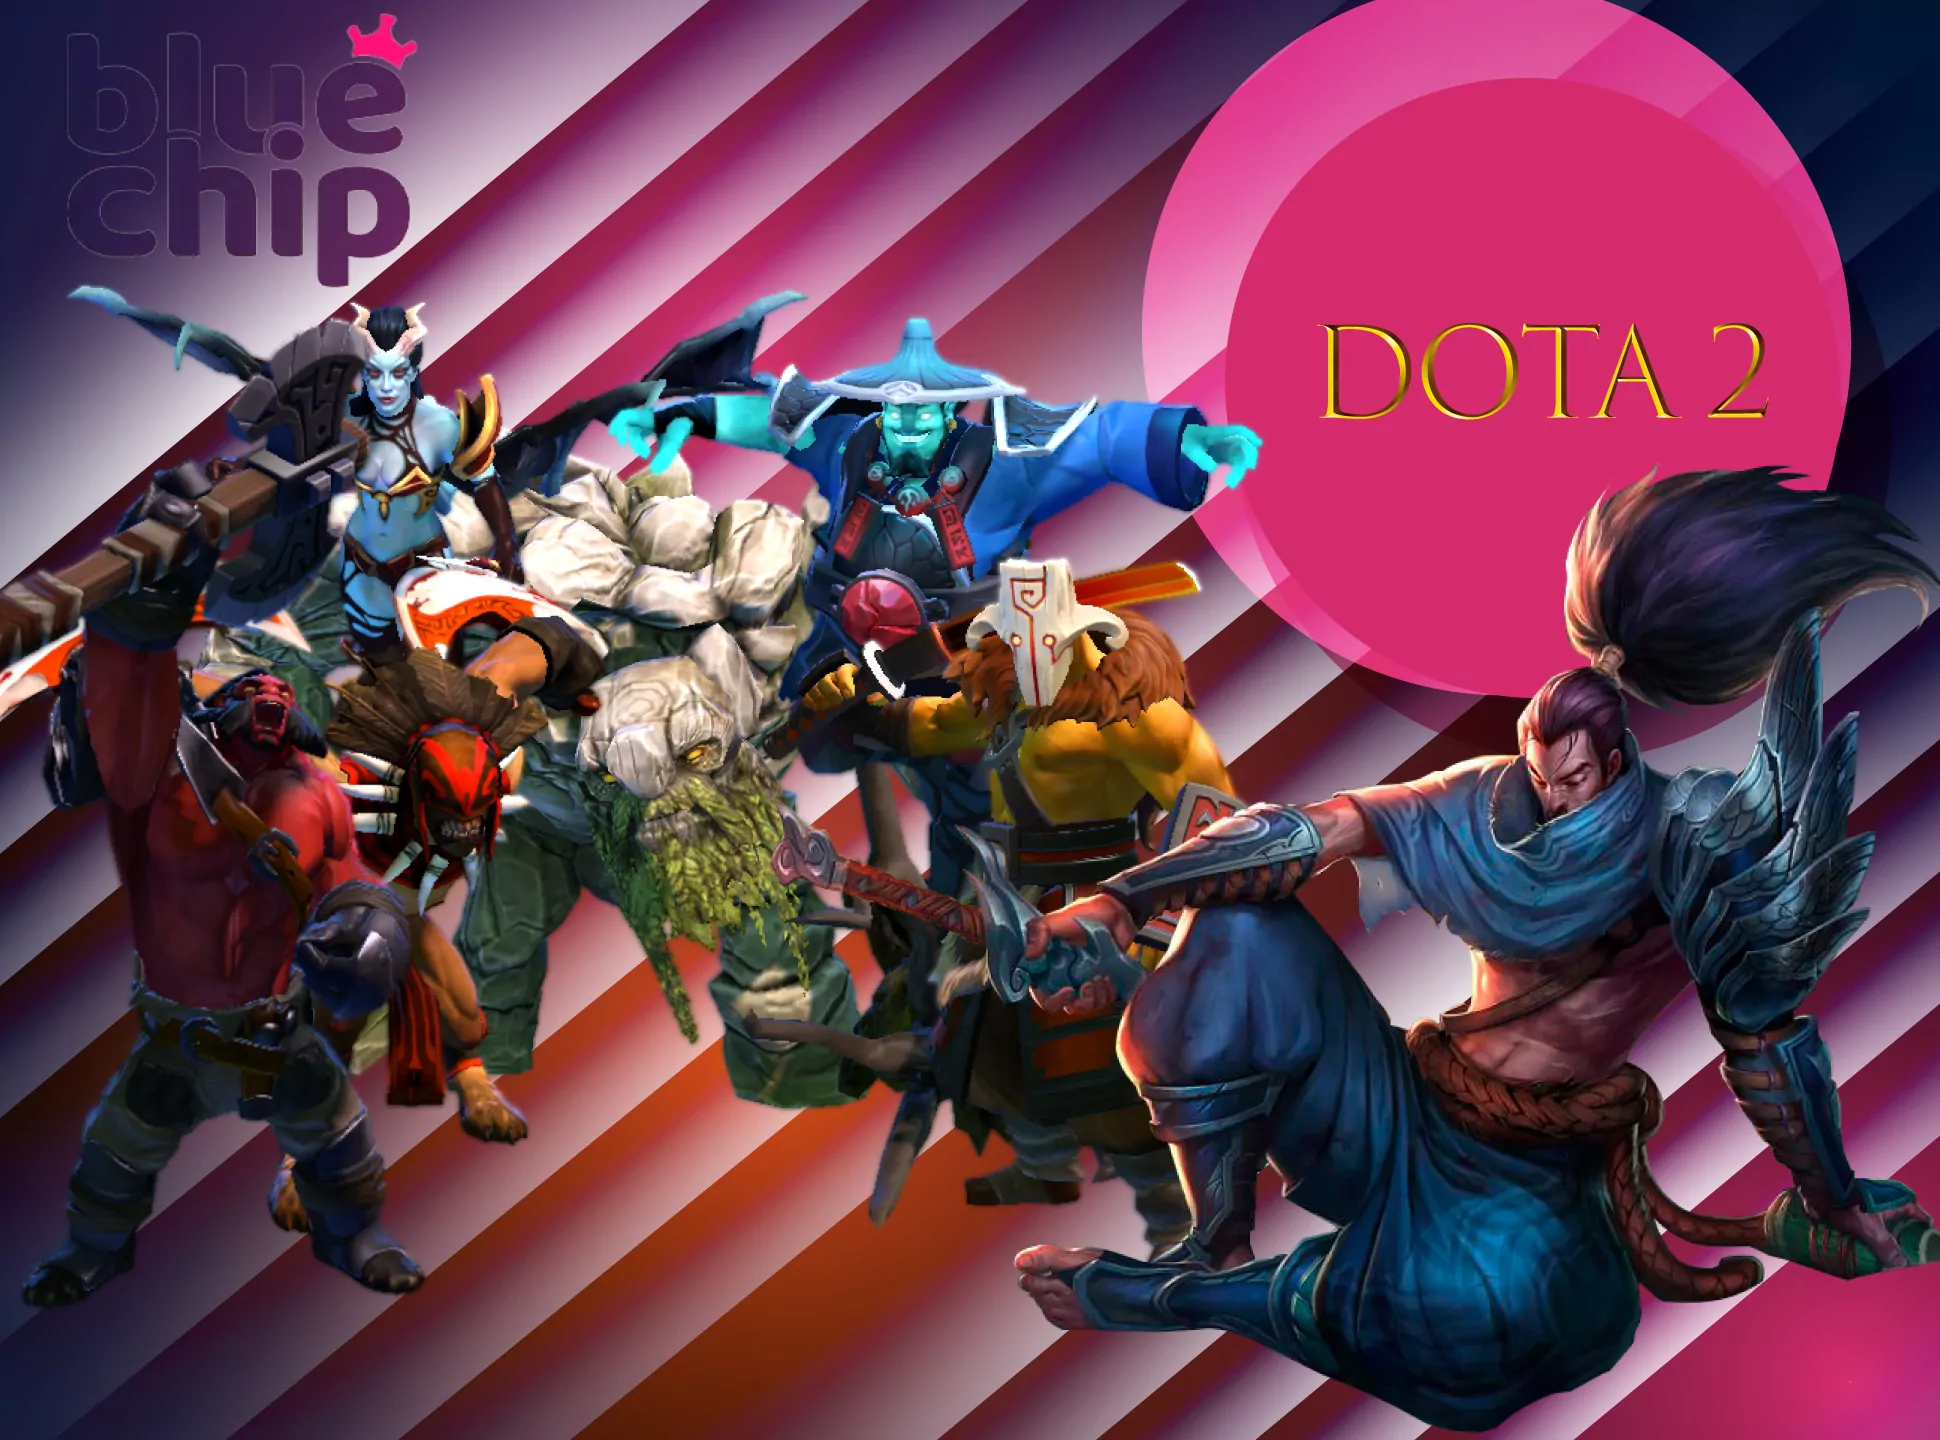 Dota 2 is also available at Bluechip.